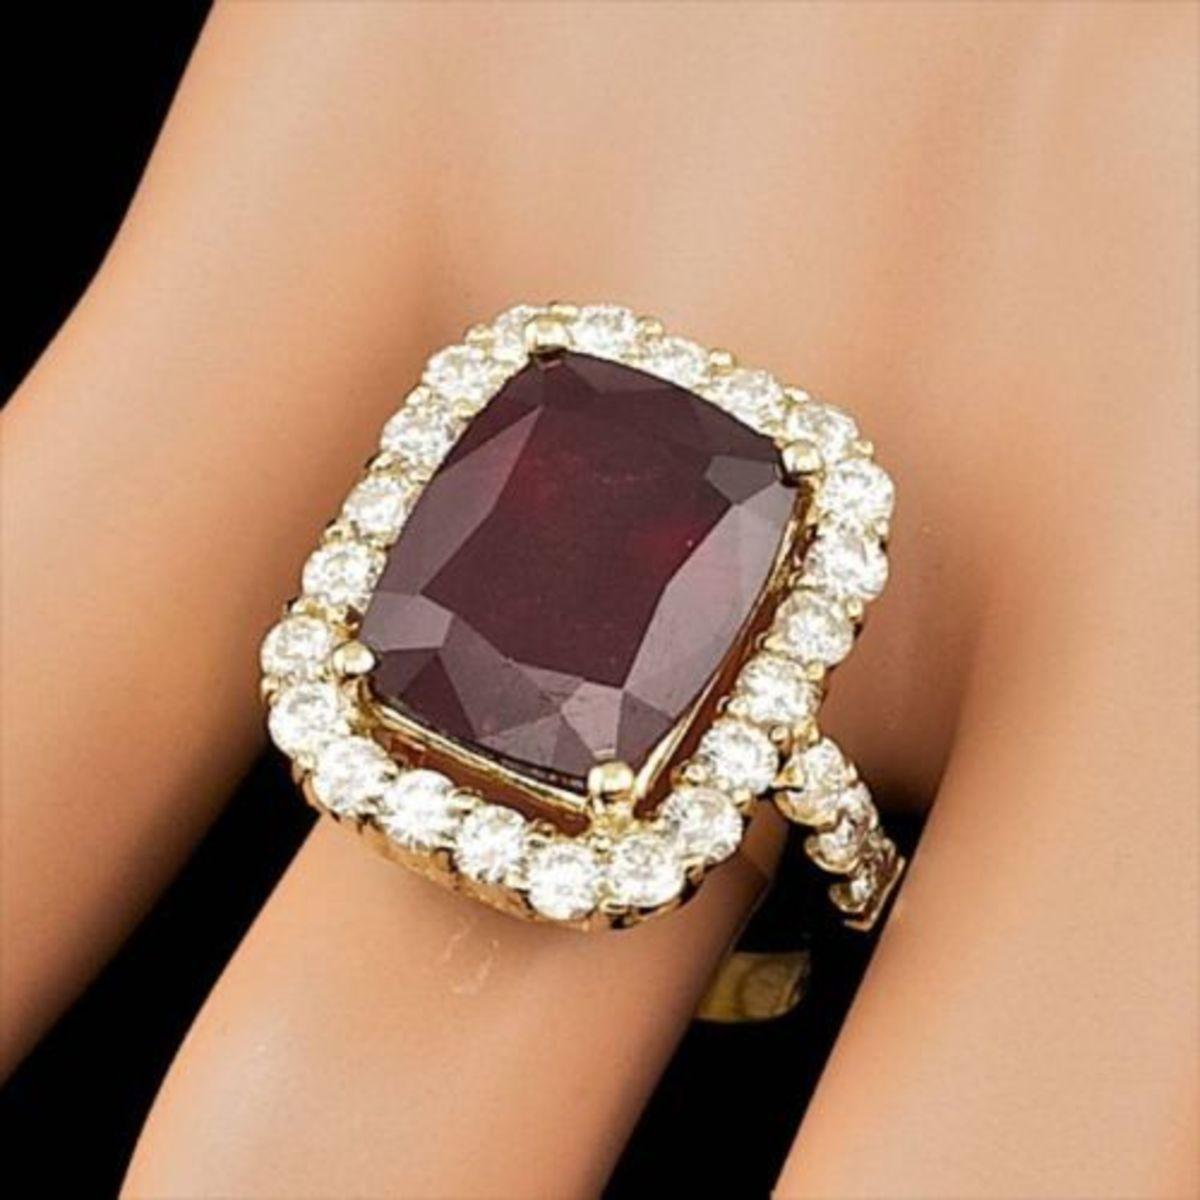 14K Yellow Gold 11.69ct Ruby and 1.88ct Diamond Ring